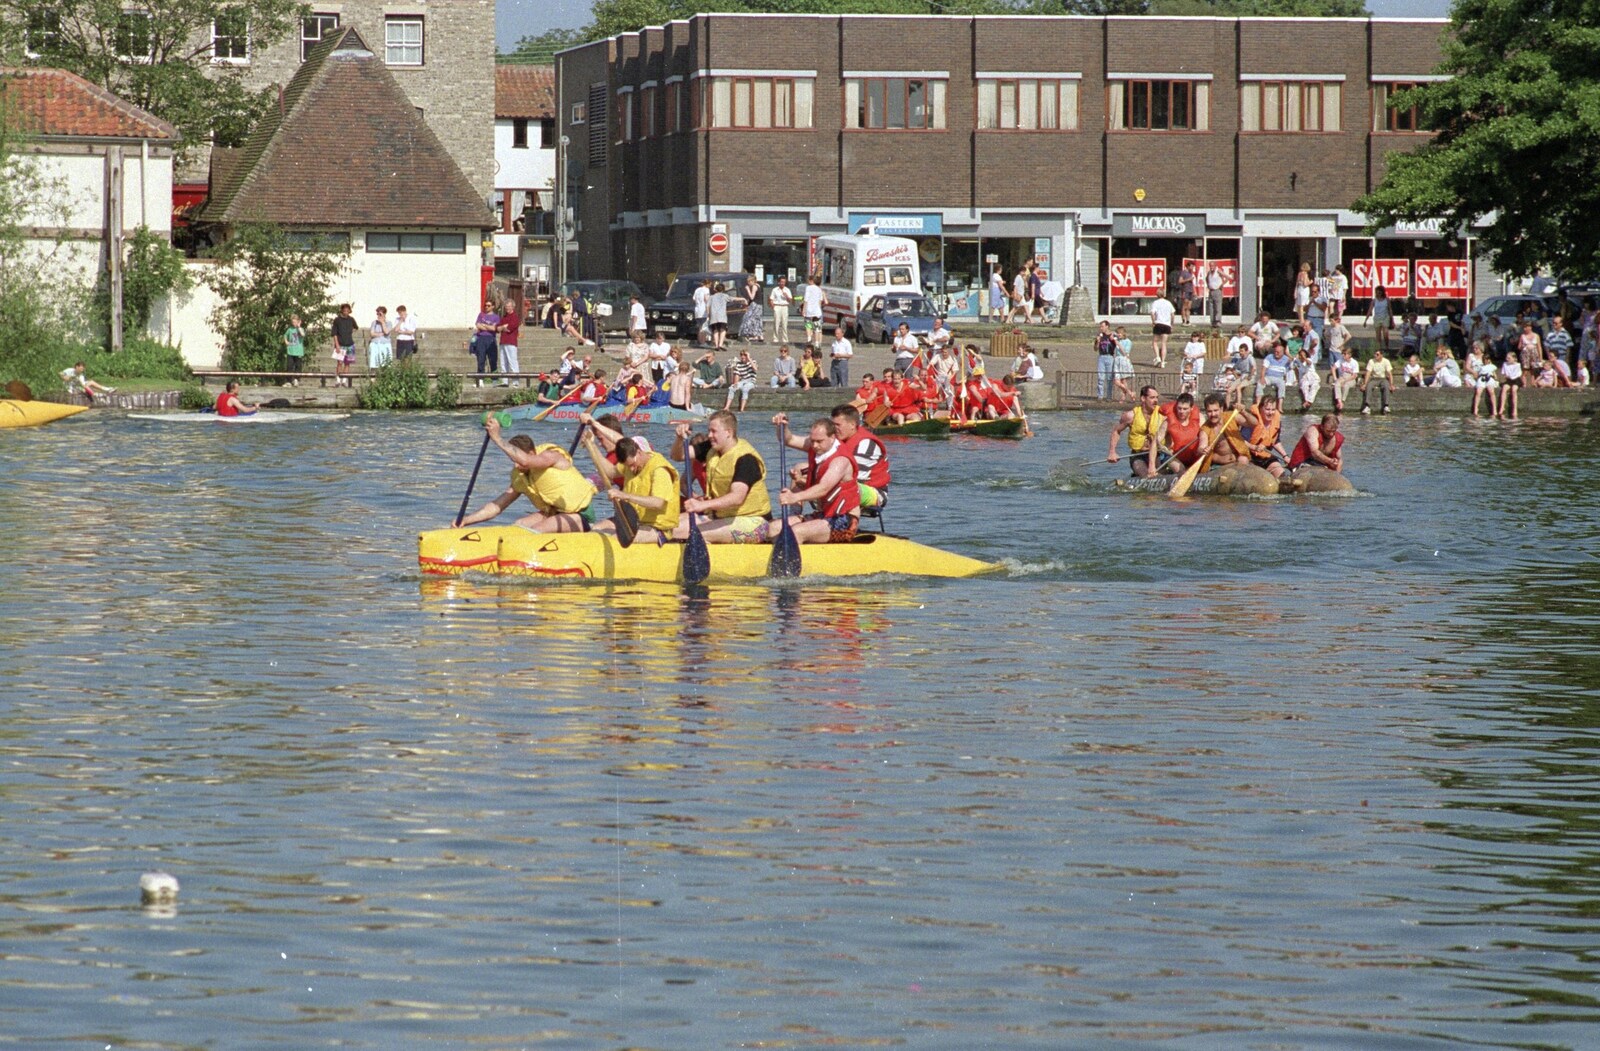 A banana/dragon boat paddles furiously from The Diss Raft Race, Diss Mere, Norfolk - 6th July 1991